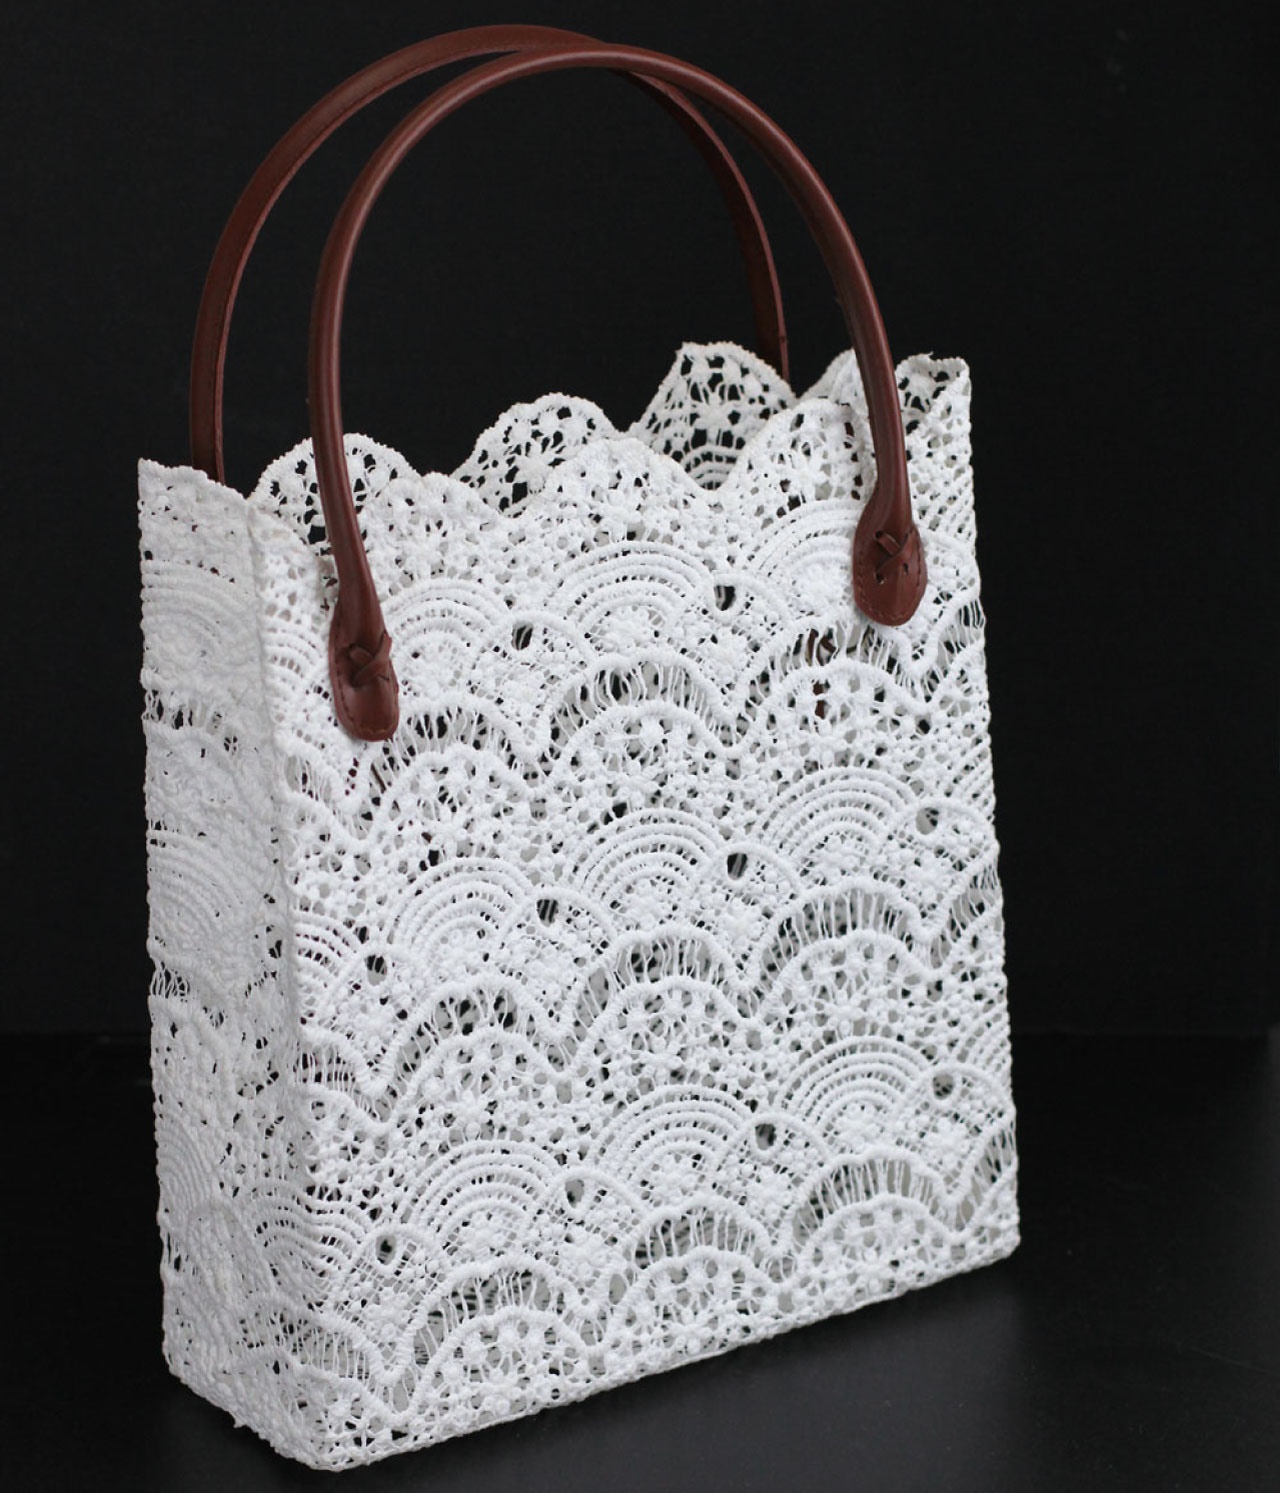 11" x 11.5" x 4" White Lace Bag with Brown Handles